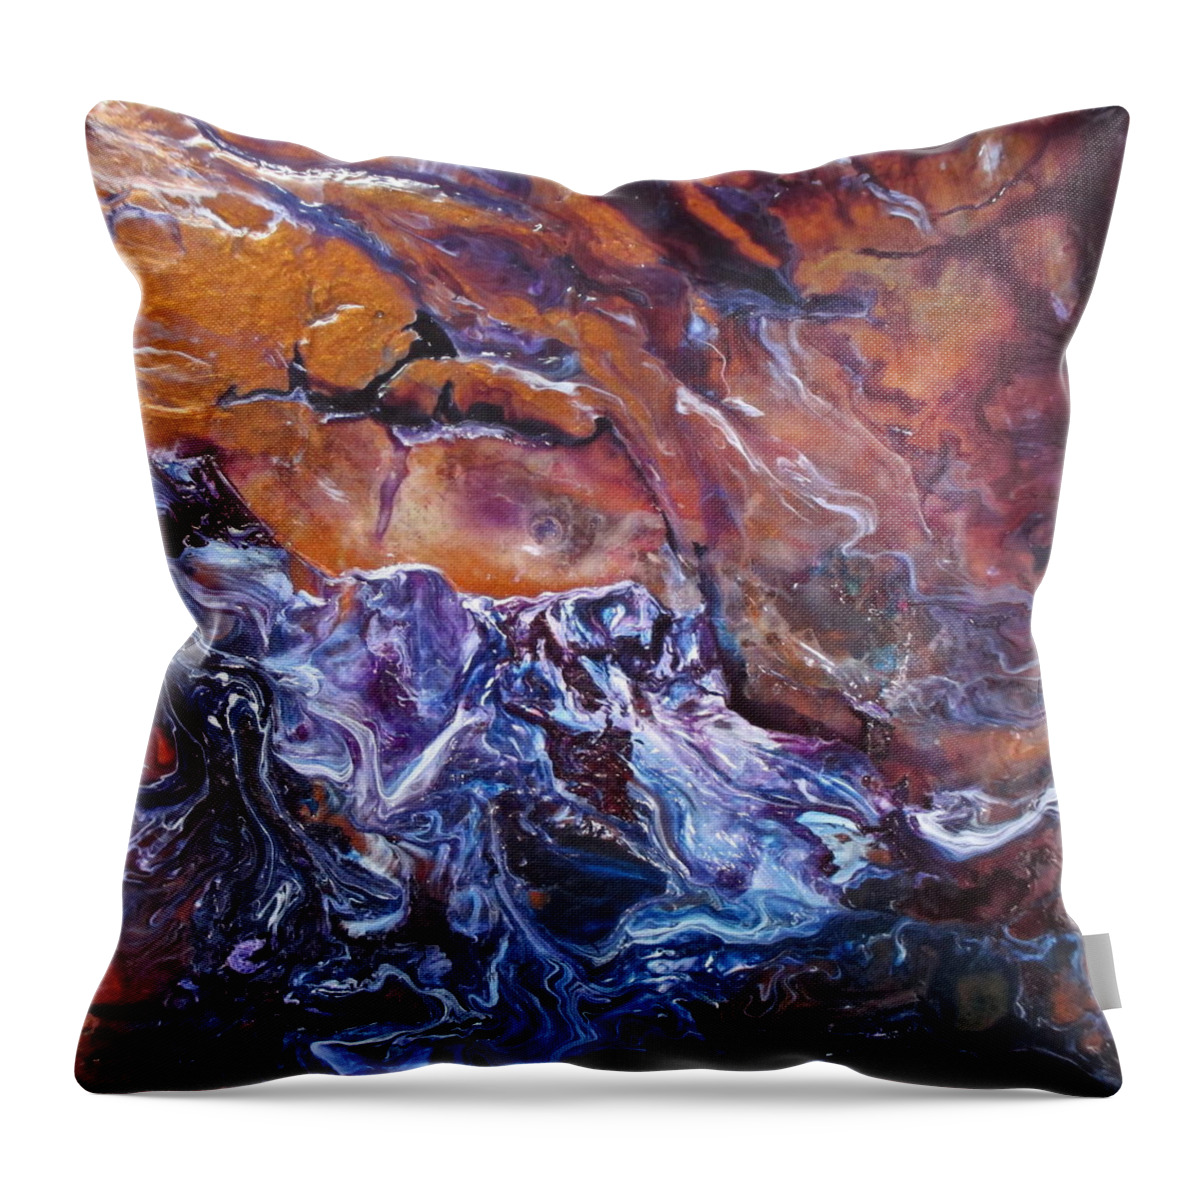 Sky Throw Pillow featuring the painting Copper Sky by Janice Nabors Raiteri